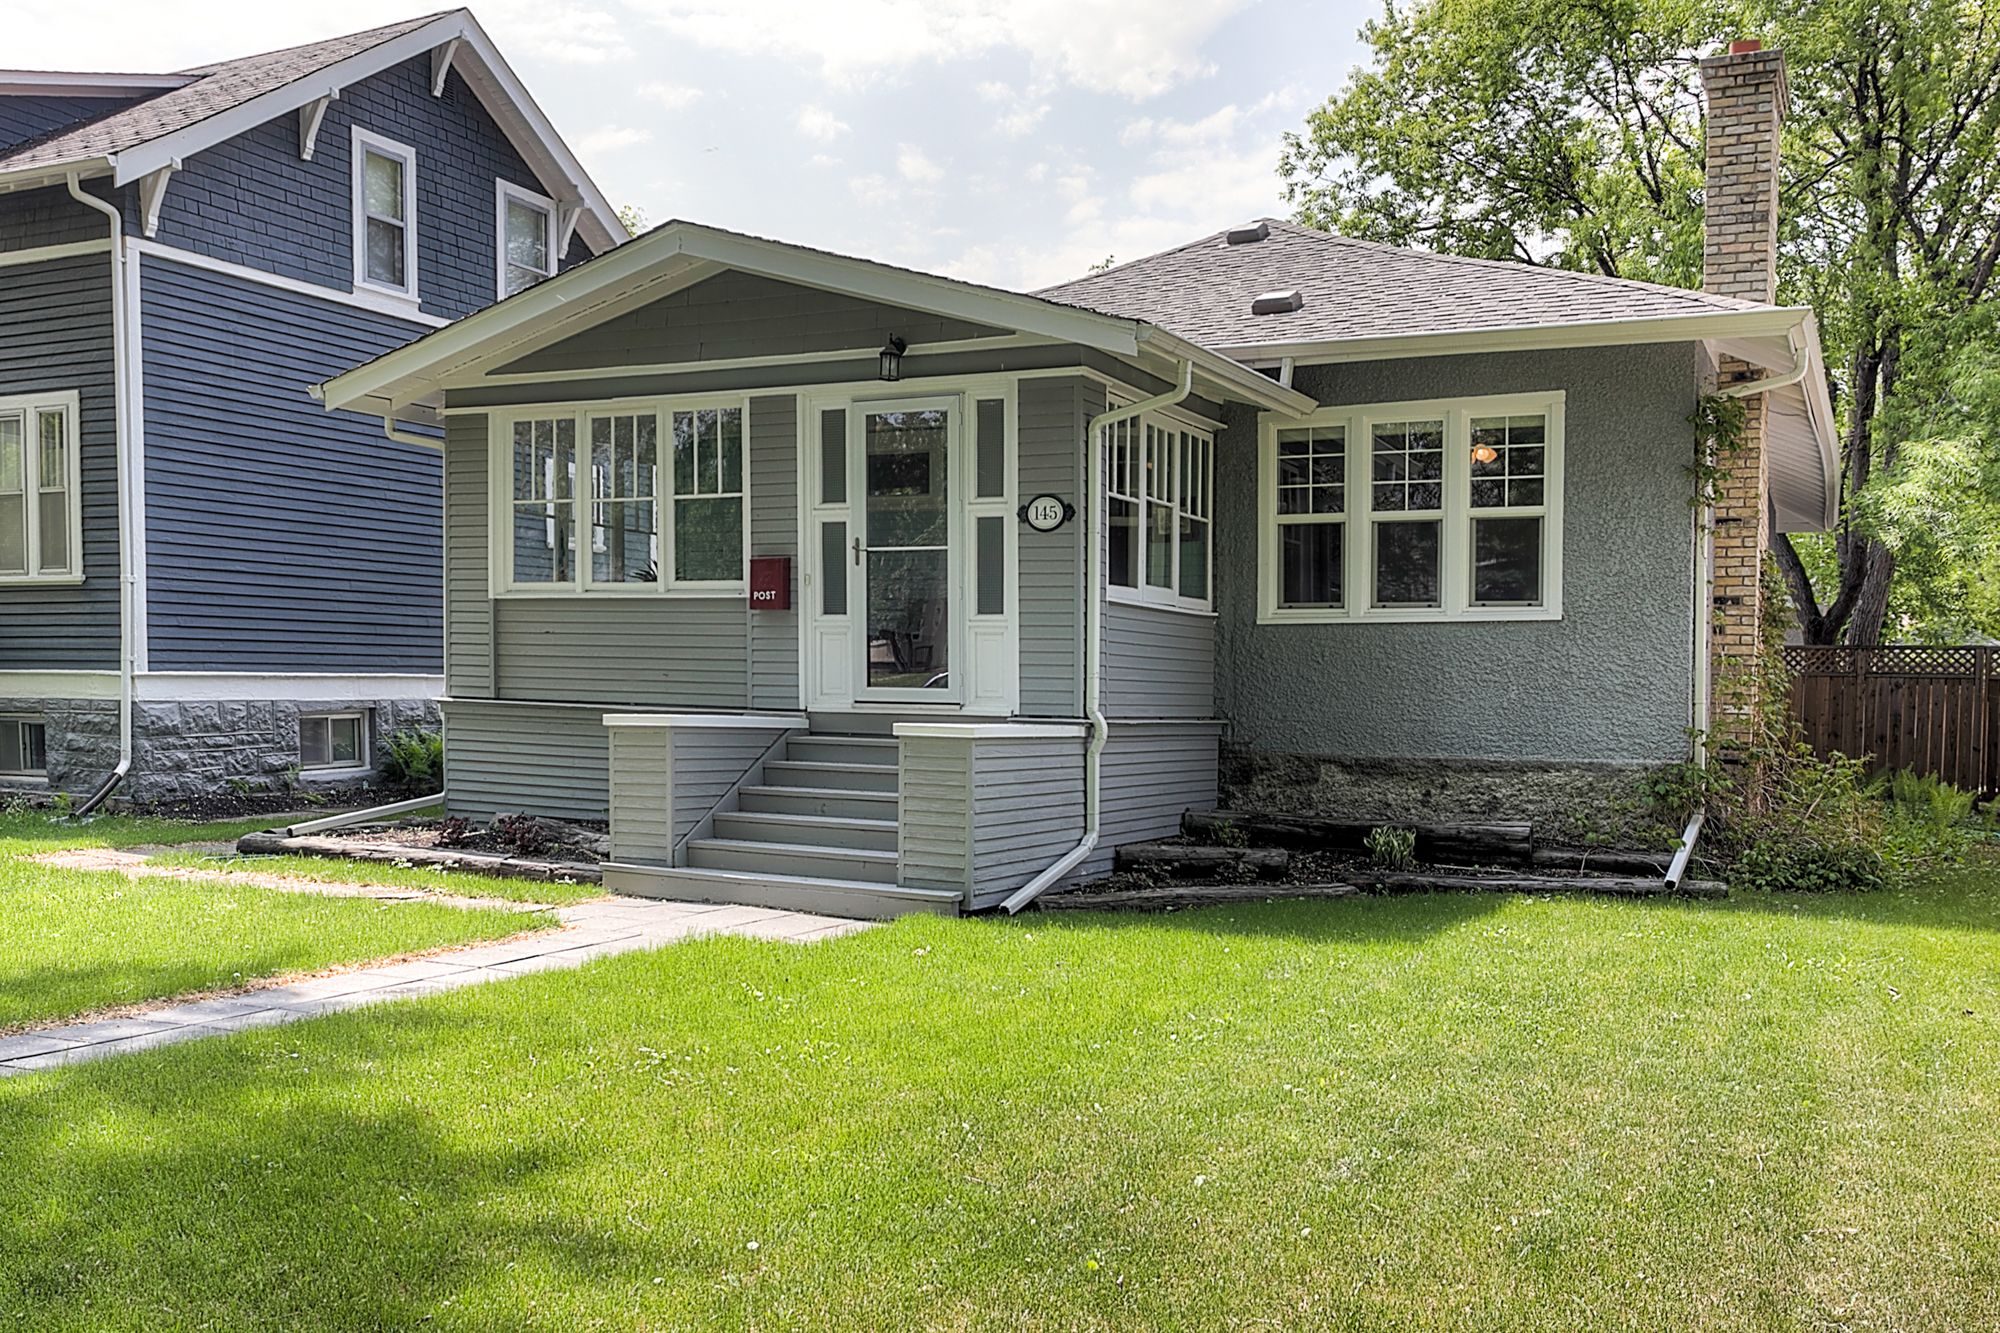 Main Photo: 145 Campbell Street in Winnipeg: River Heights North Single Family Detached for sale (1C)  : MLS®# 1923580